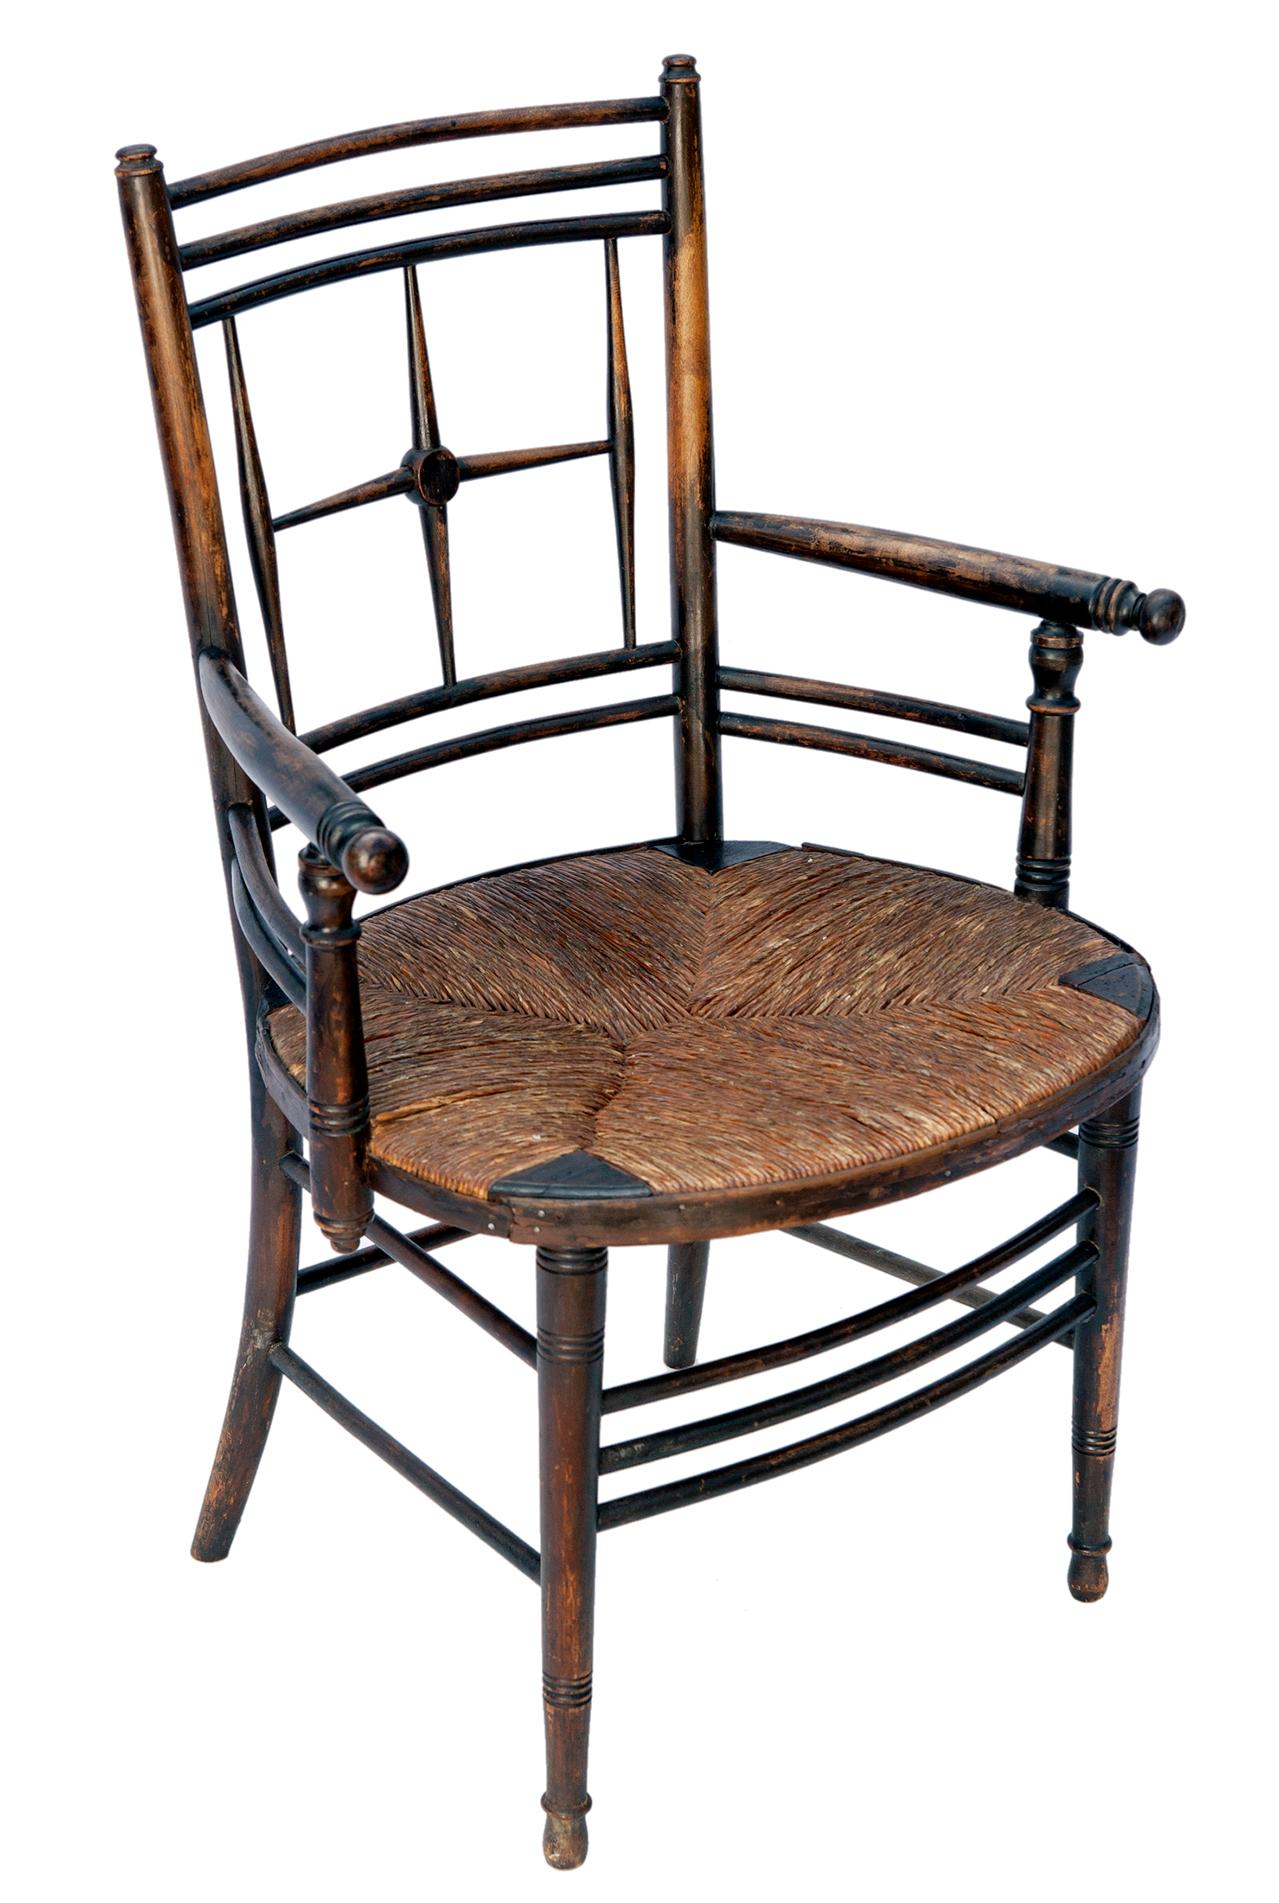 19th C aged ebony chair by William Morris & Company.
The Sussex Chair with rush seat was designed for William Morris by the British painter Ford Madox.
It has been restored during its life, attesting to its value.
This chair has been exhibited in